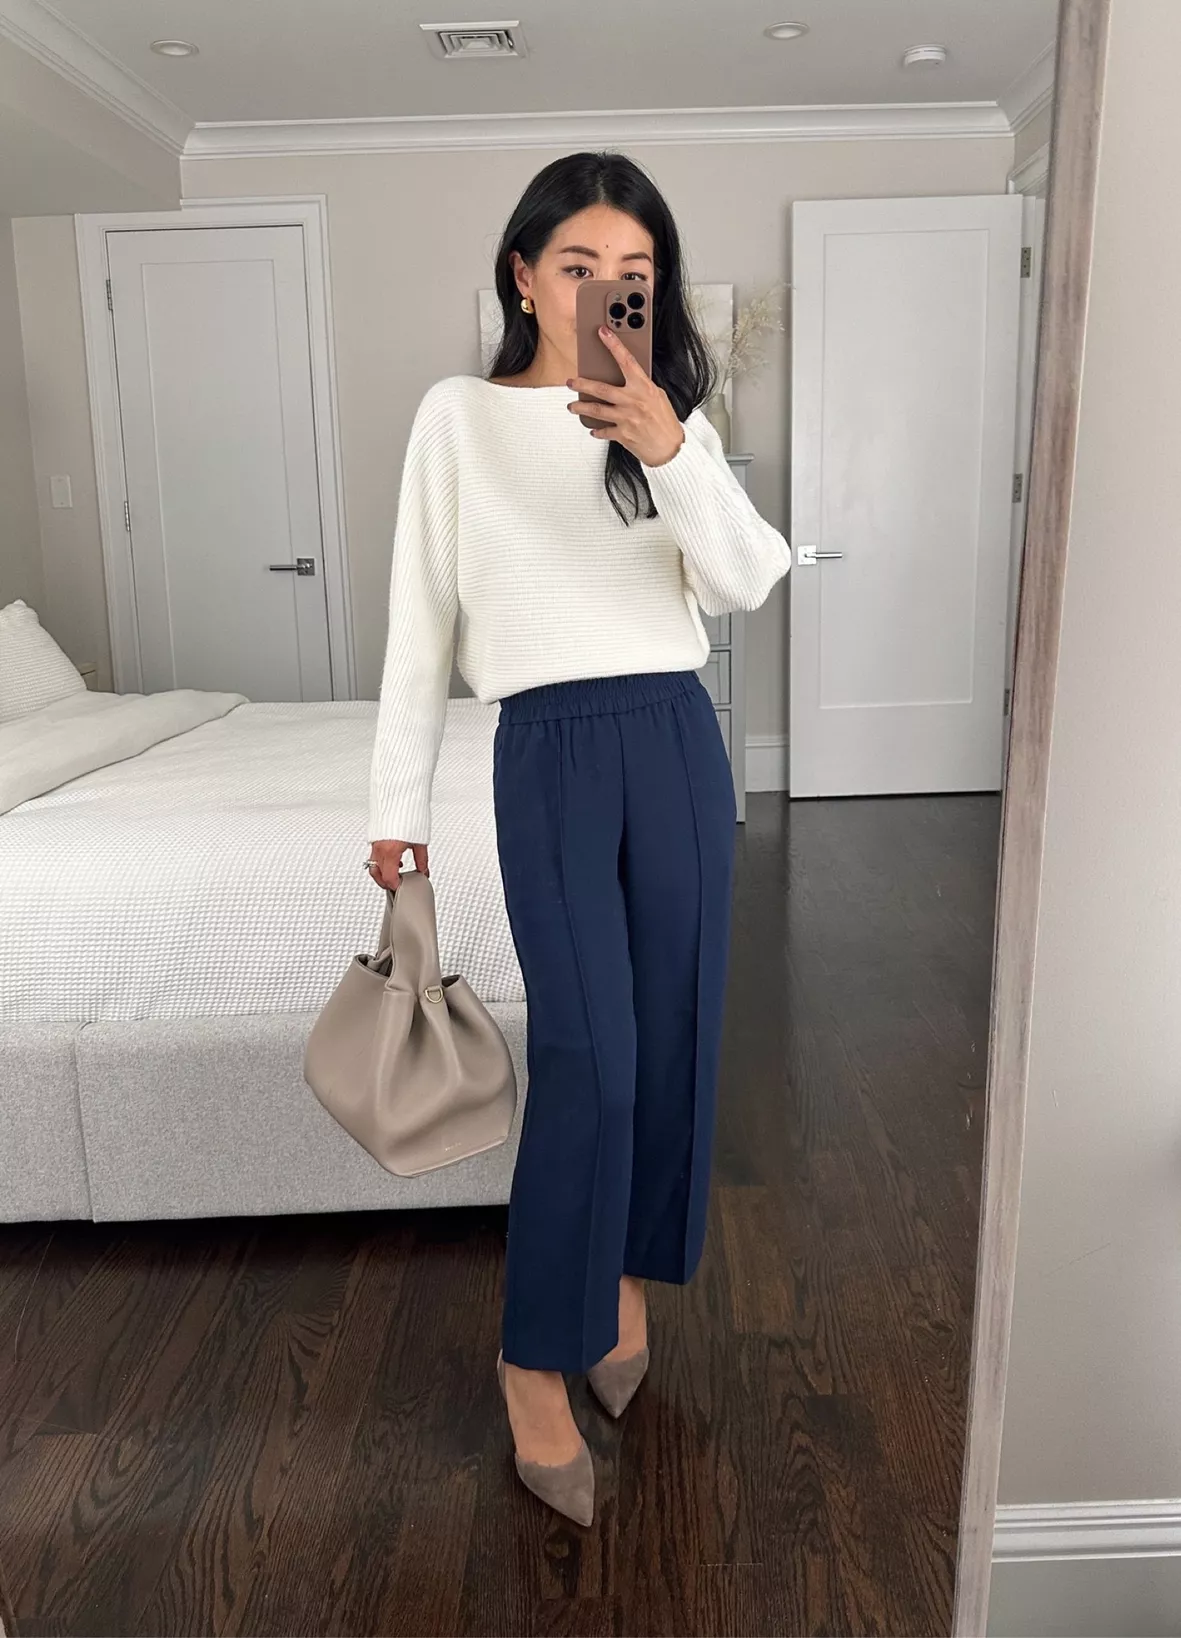 Ann Taylor The Tall Pintucked Ankle Pant Double Knit